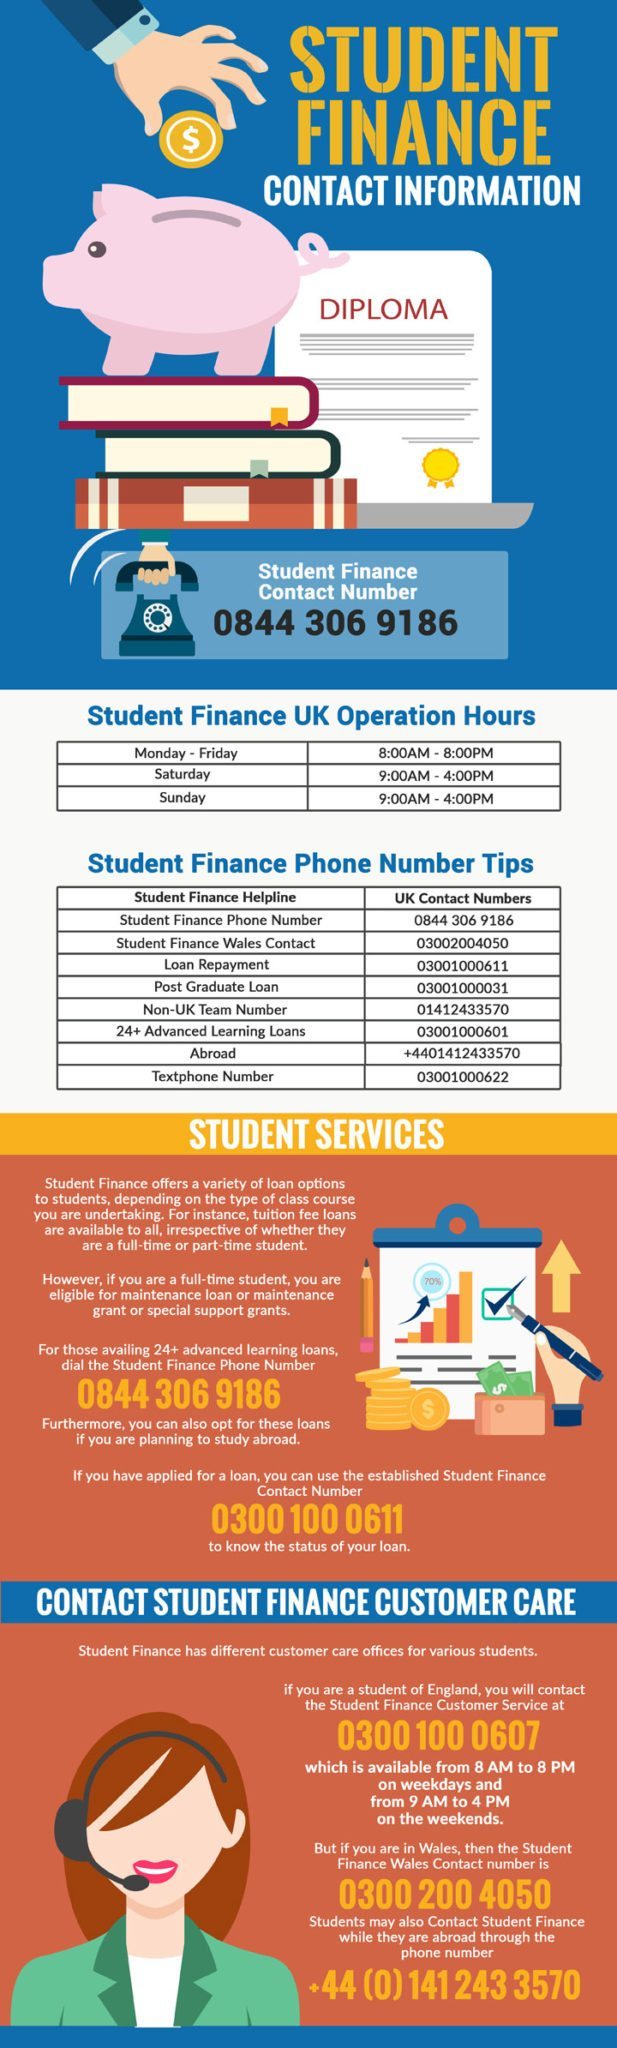 Student Finance Customer Services